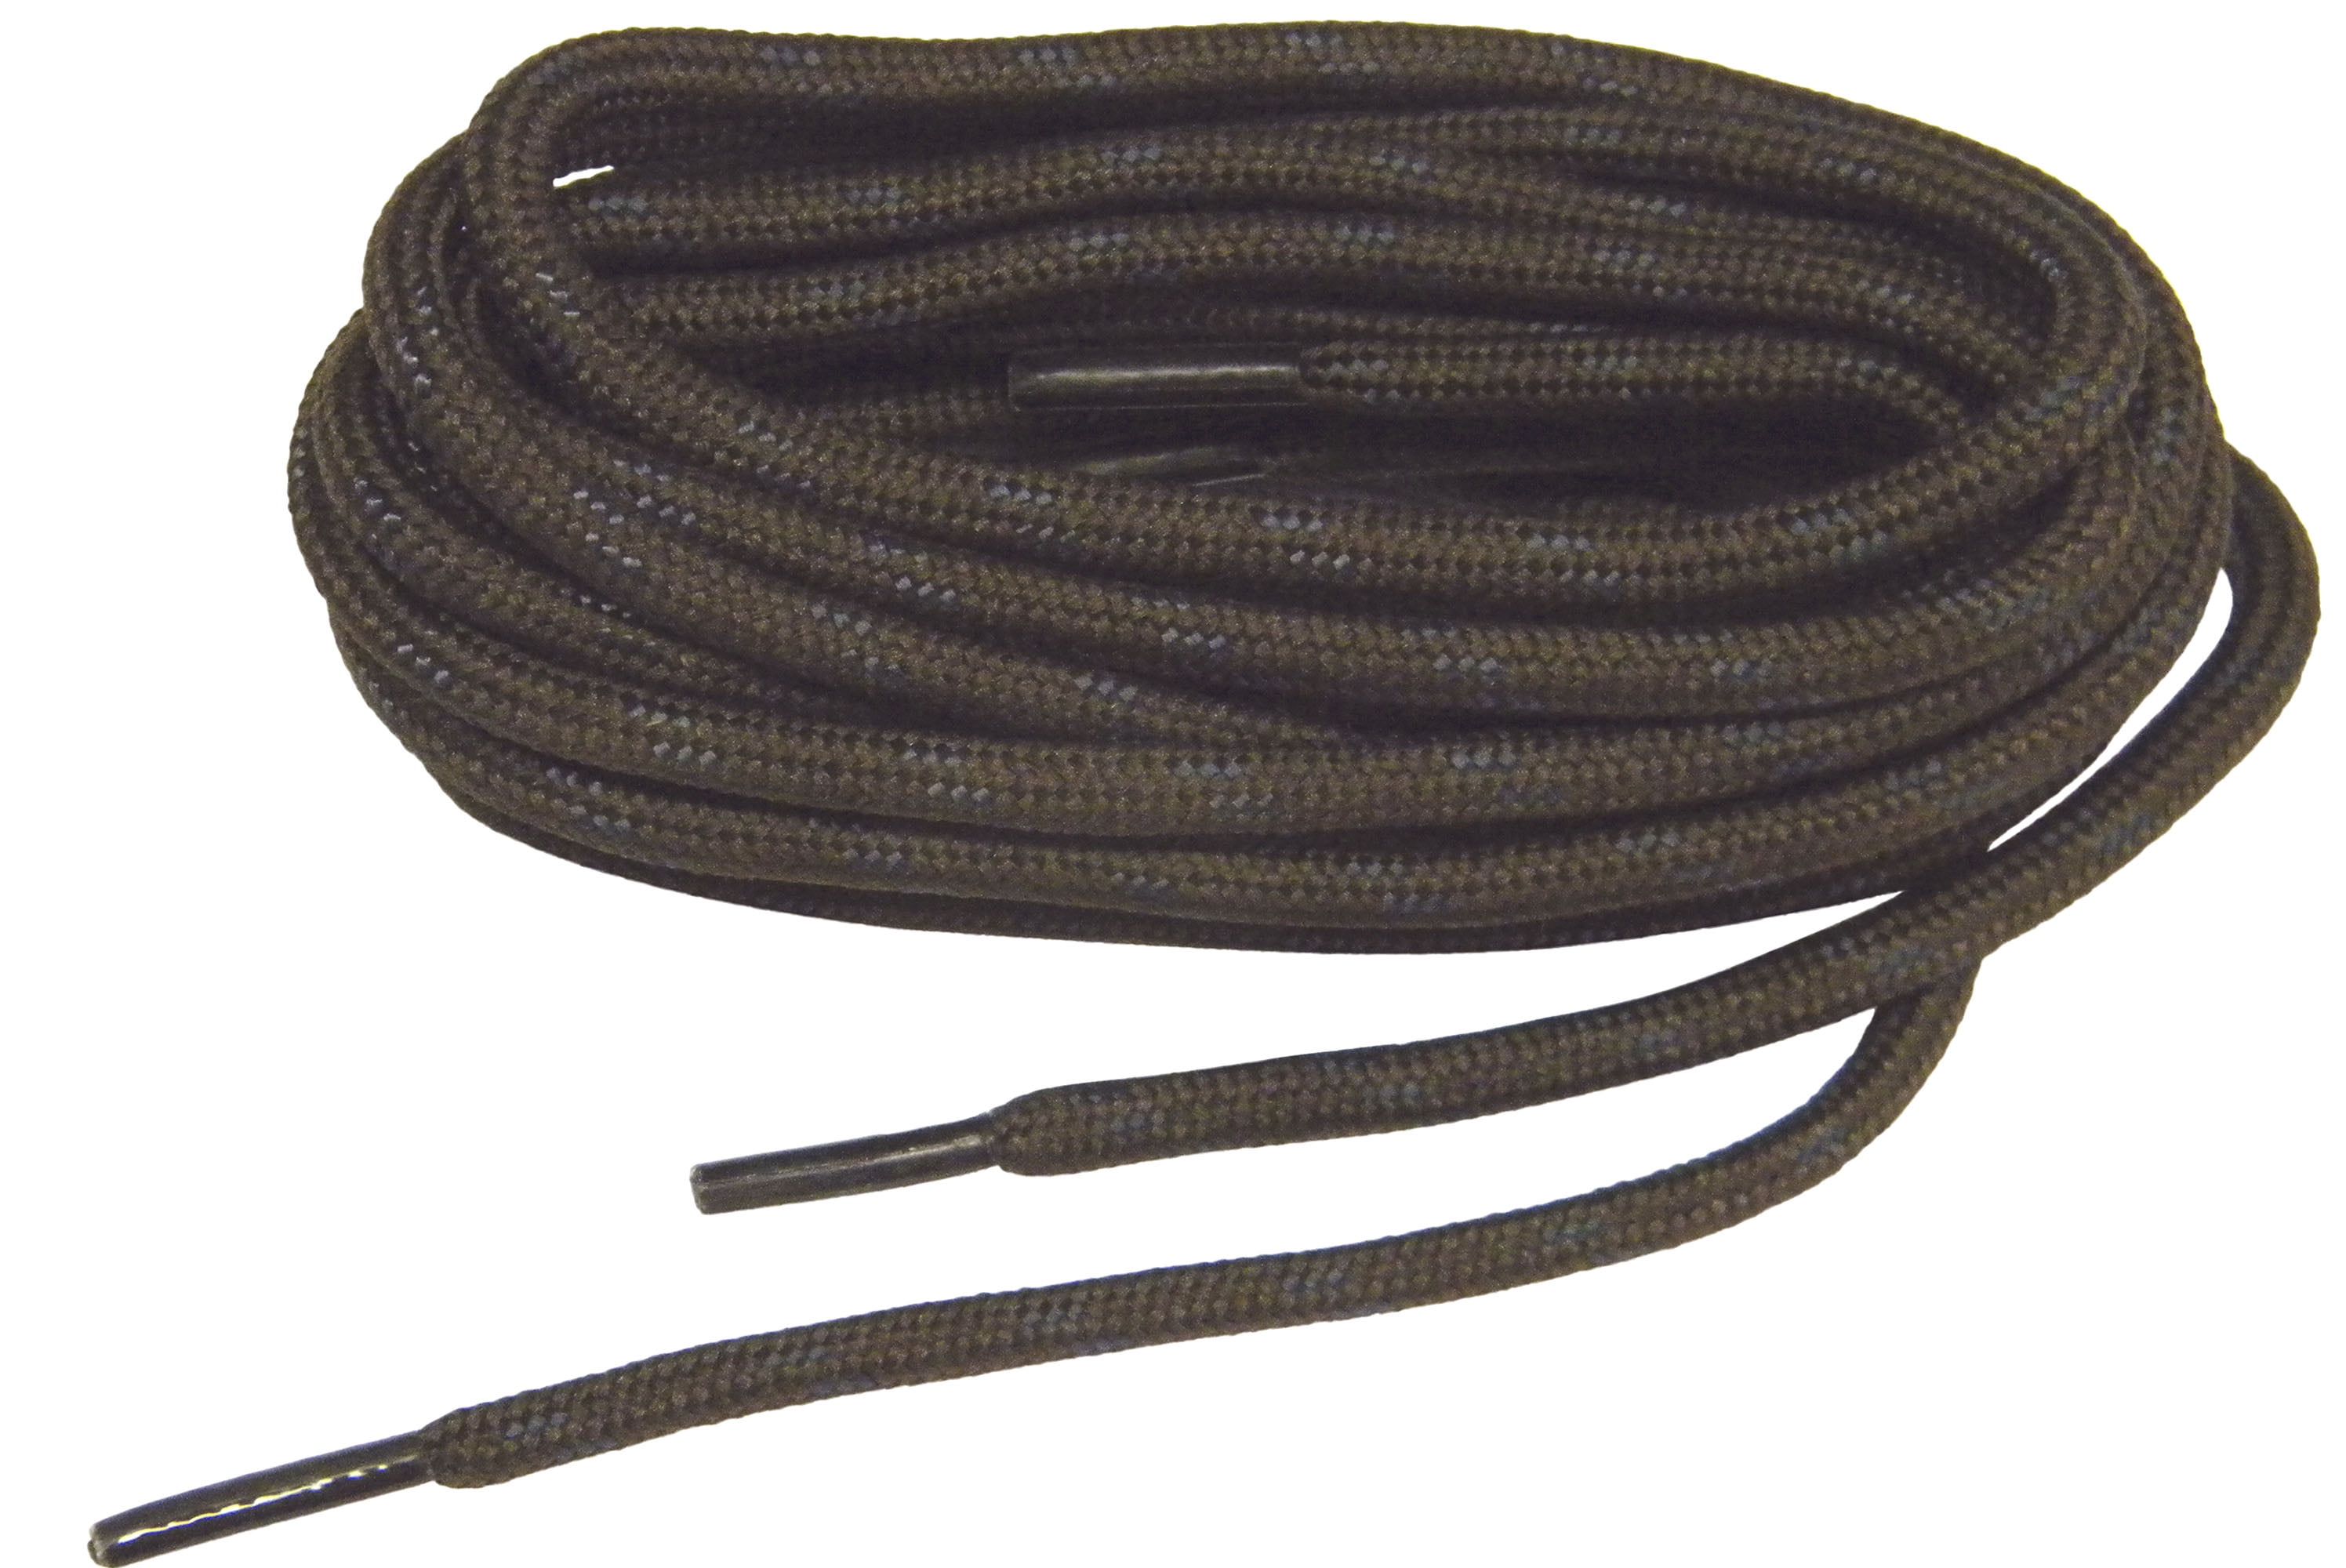 2 Pair Yellow w/Black 7/32 thick heavy duty shoelaces made with Kevlar strands